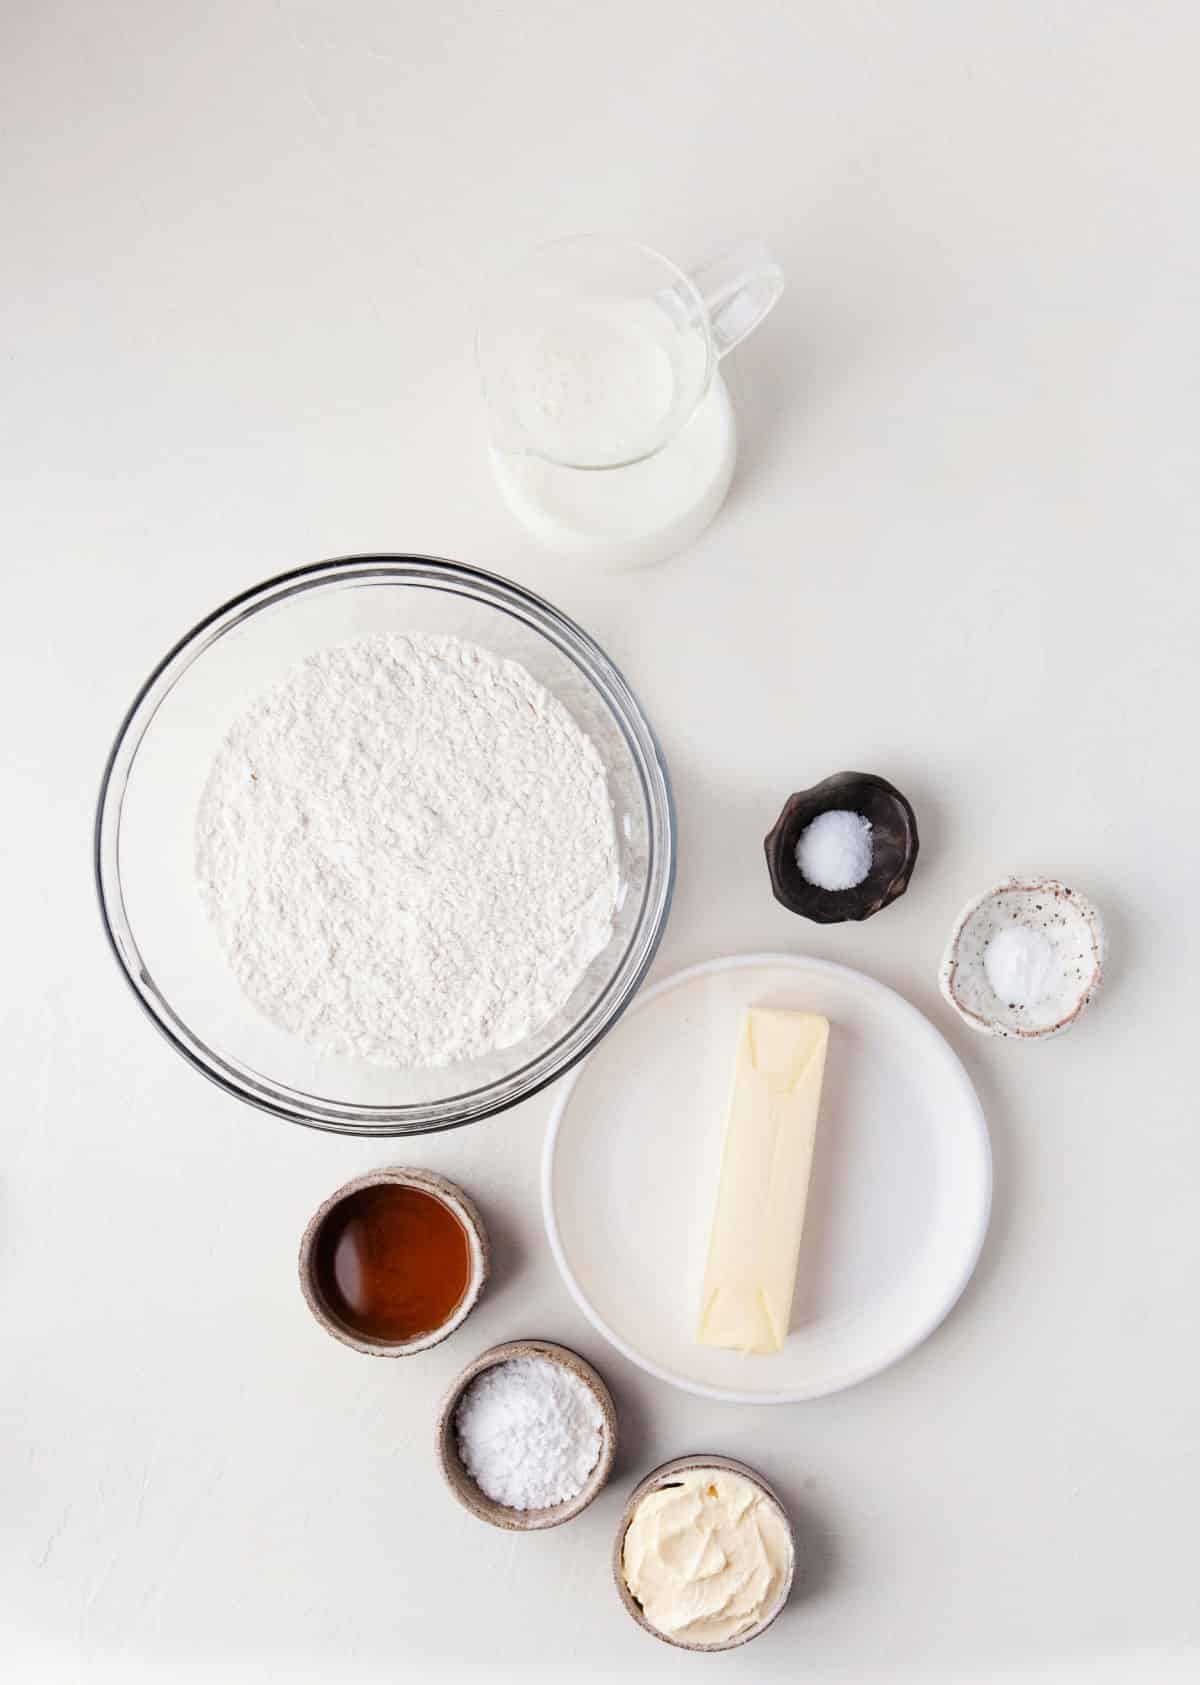 Ingredients for buttermilk biscuits in dishes.